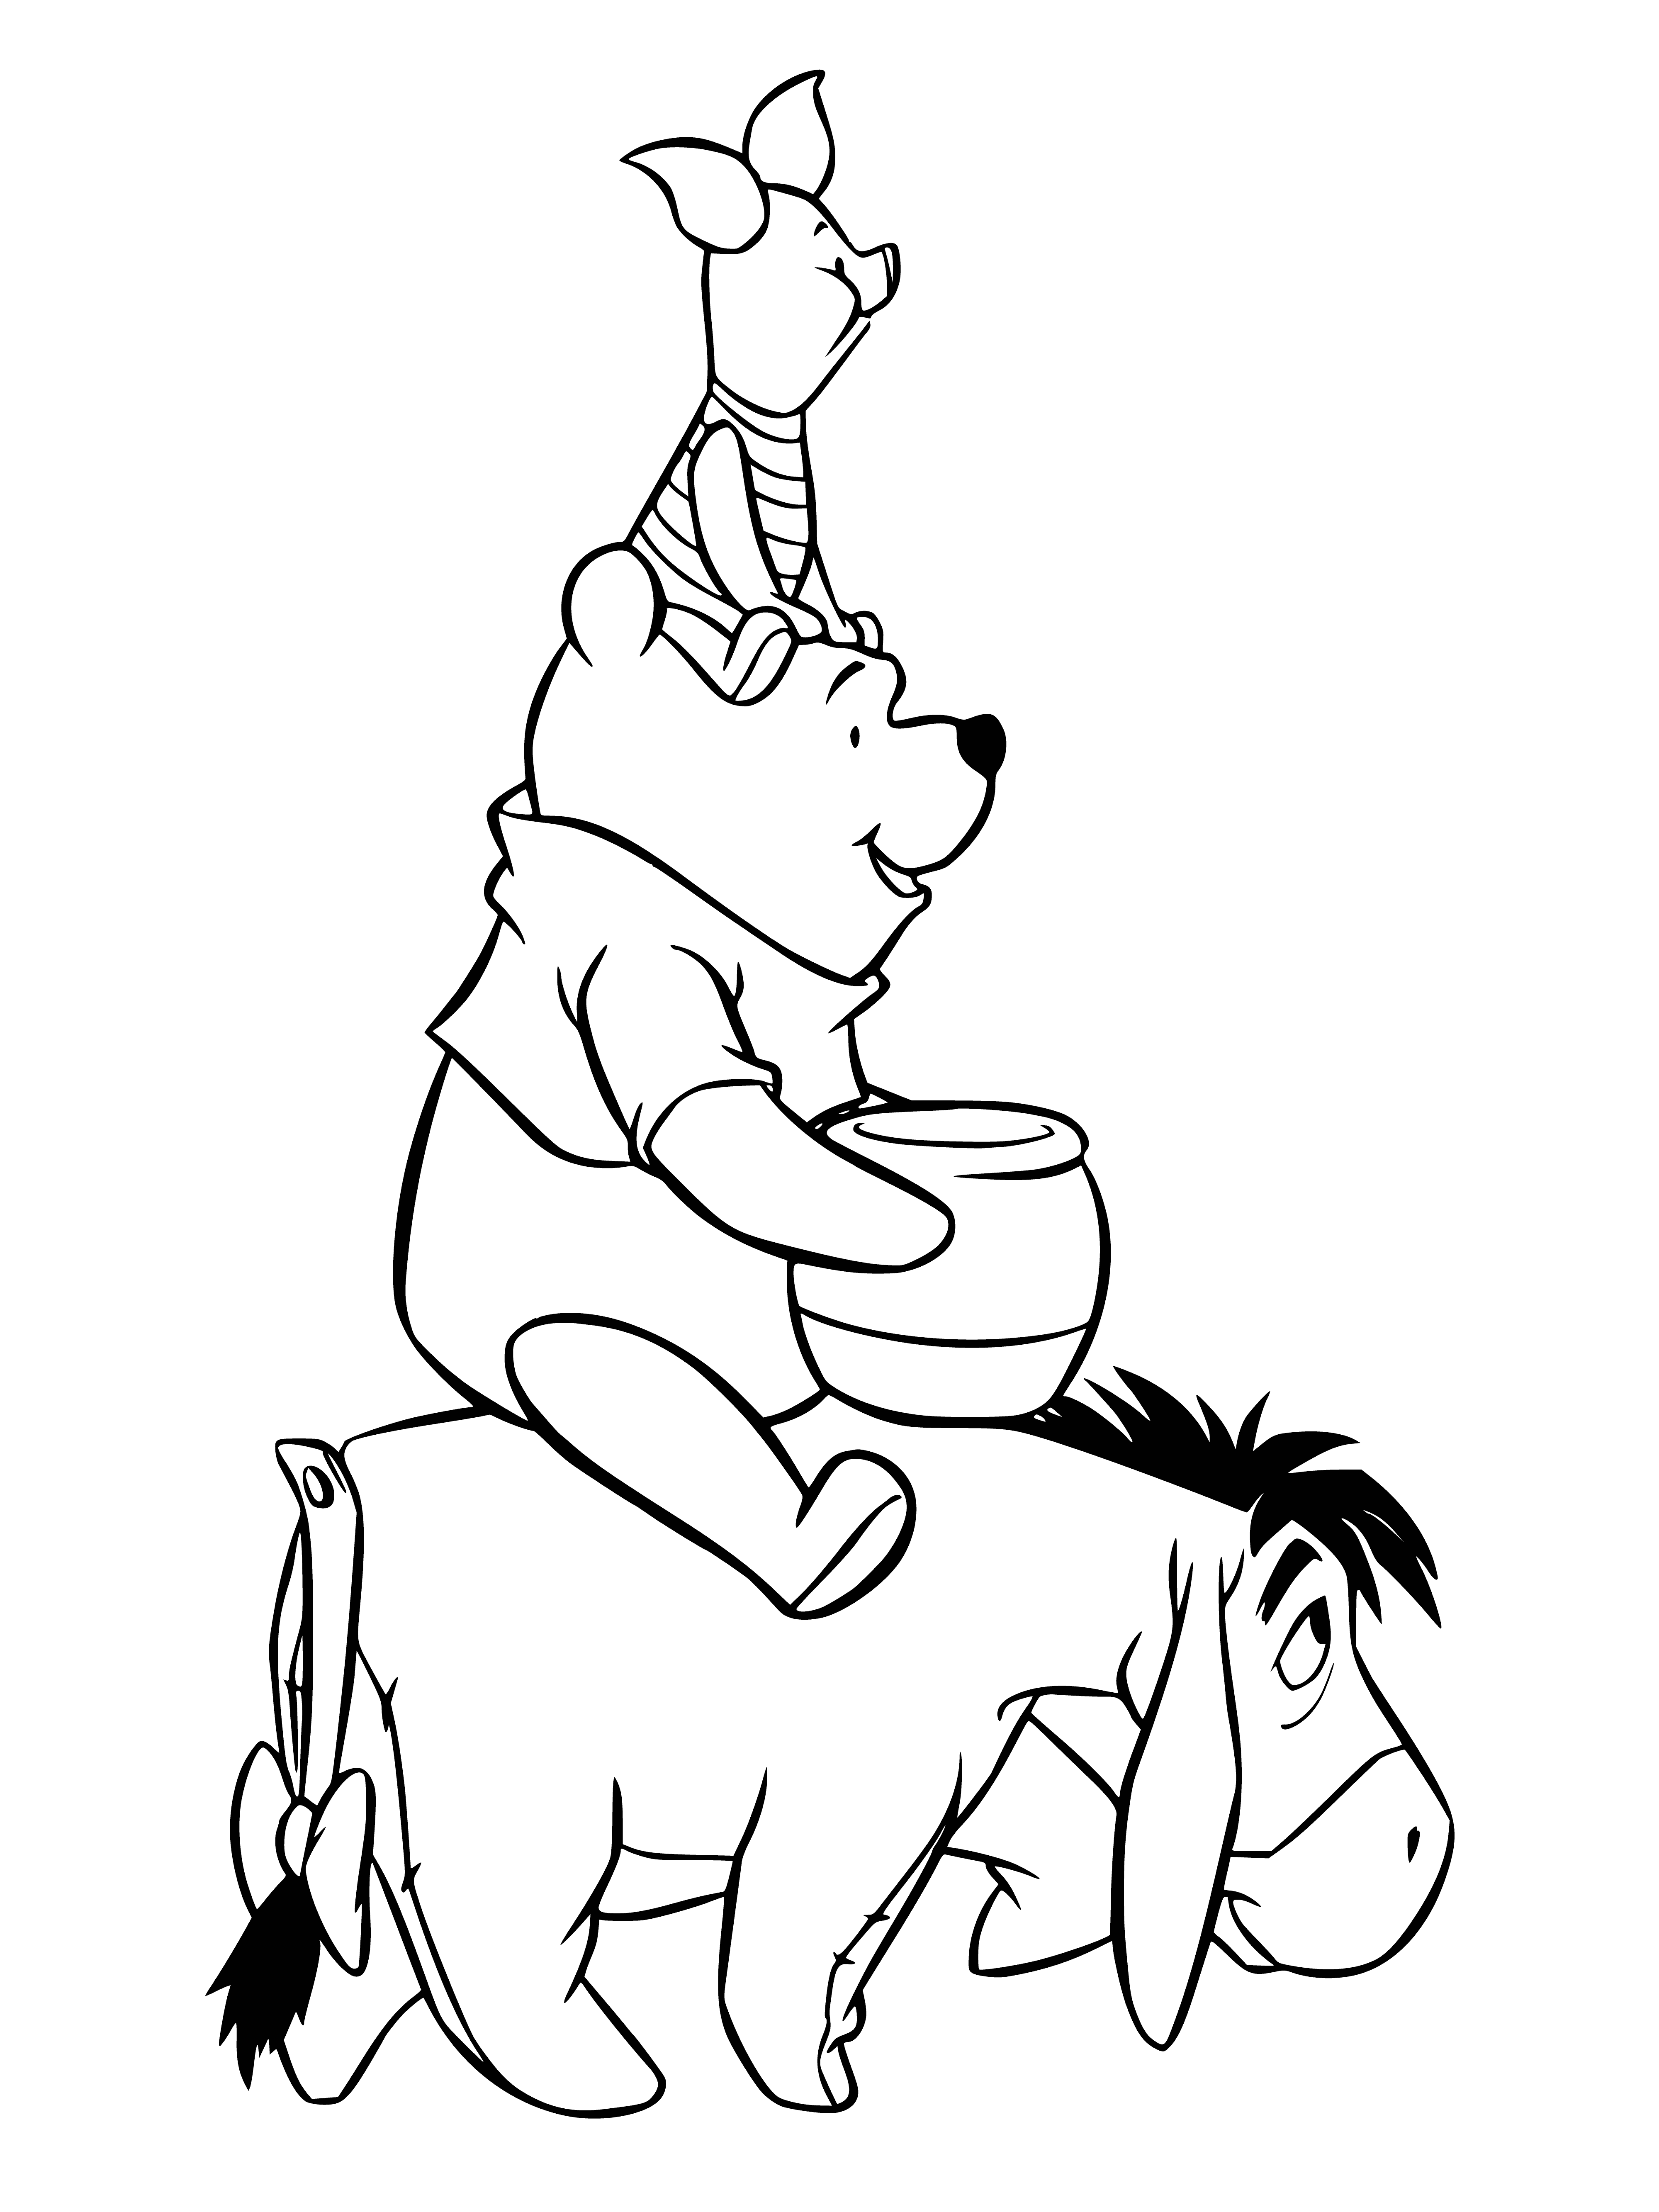 coloring page: Winnie the Pooh gallops on a horse wearing a red shirt, pants, and scarf, with a honey pot in his hand.